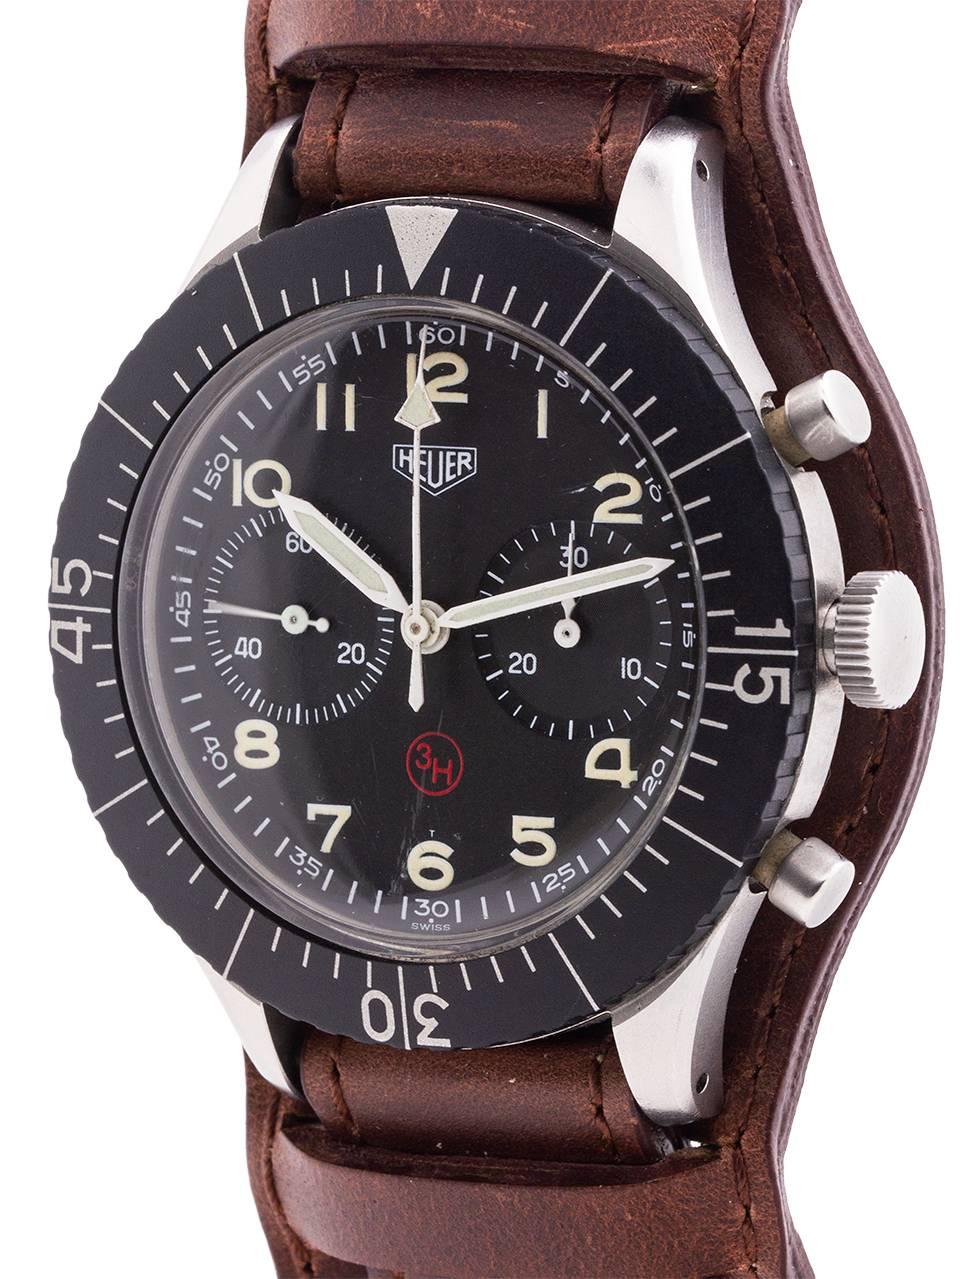 Exceptional condition example Heuer German pilot’s 2 registers manual wind chronograph with flyback function circa 1960. Large 43 X 50mm brushed finish stainless steel case with wide matte black rotating elapsed time bezel, acrylic crystal, and